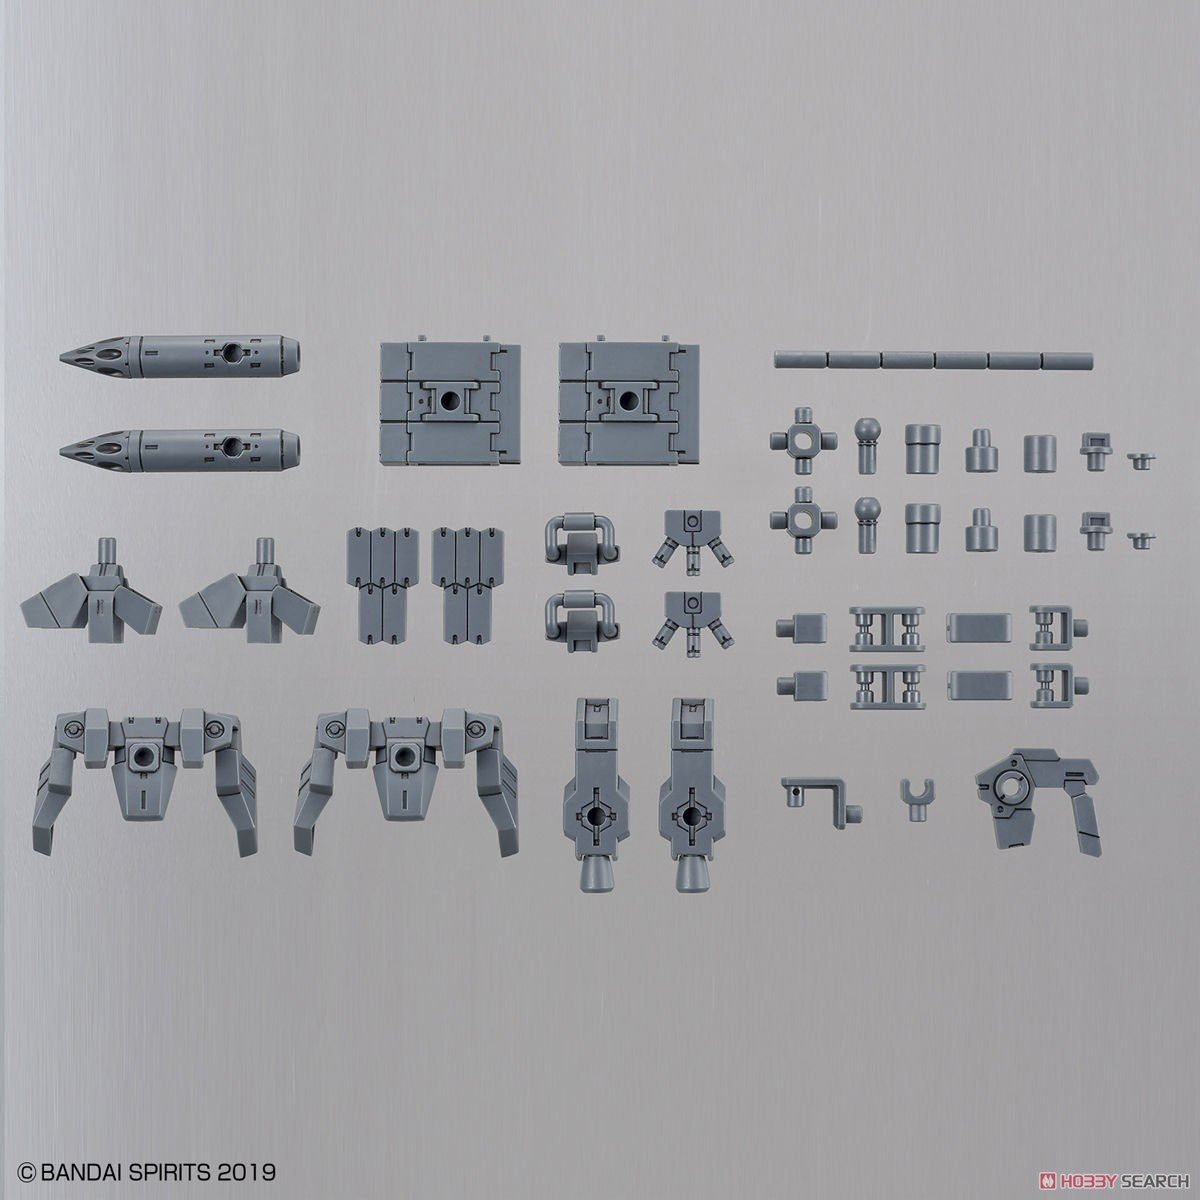 Option Parts Set 2 1/144 30 Minutes Missions Accessory Model Kit #5059021 by Bandai